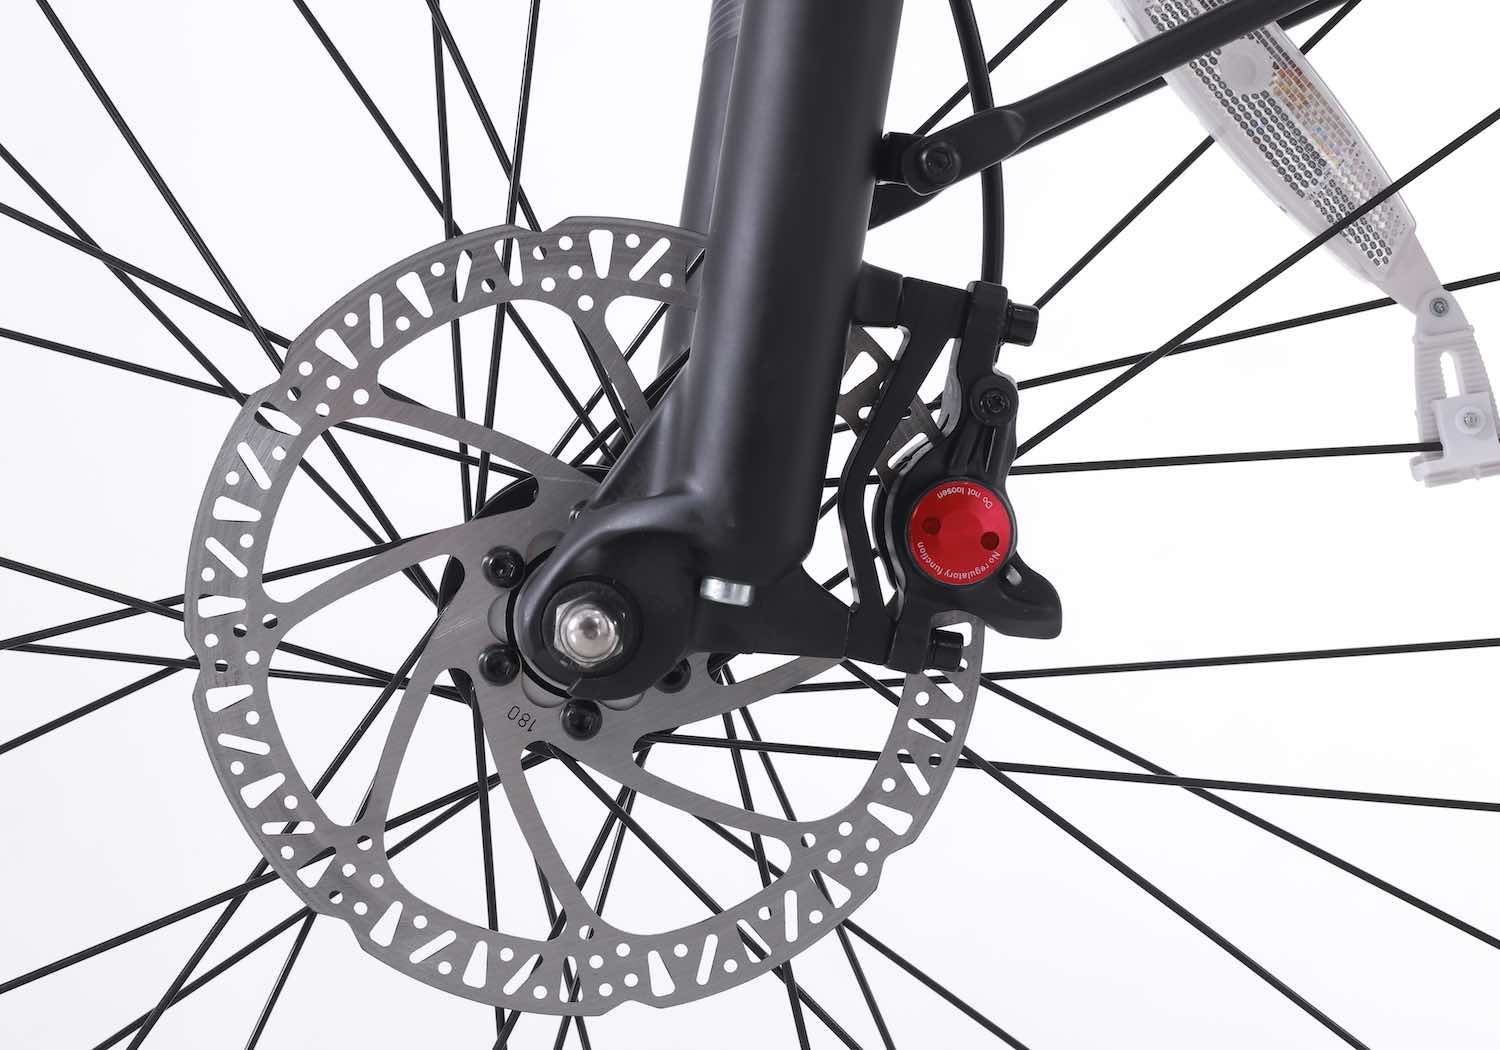 Yes, your eBike absolutely needs disc brakes